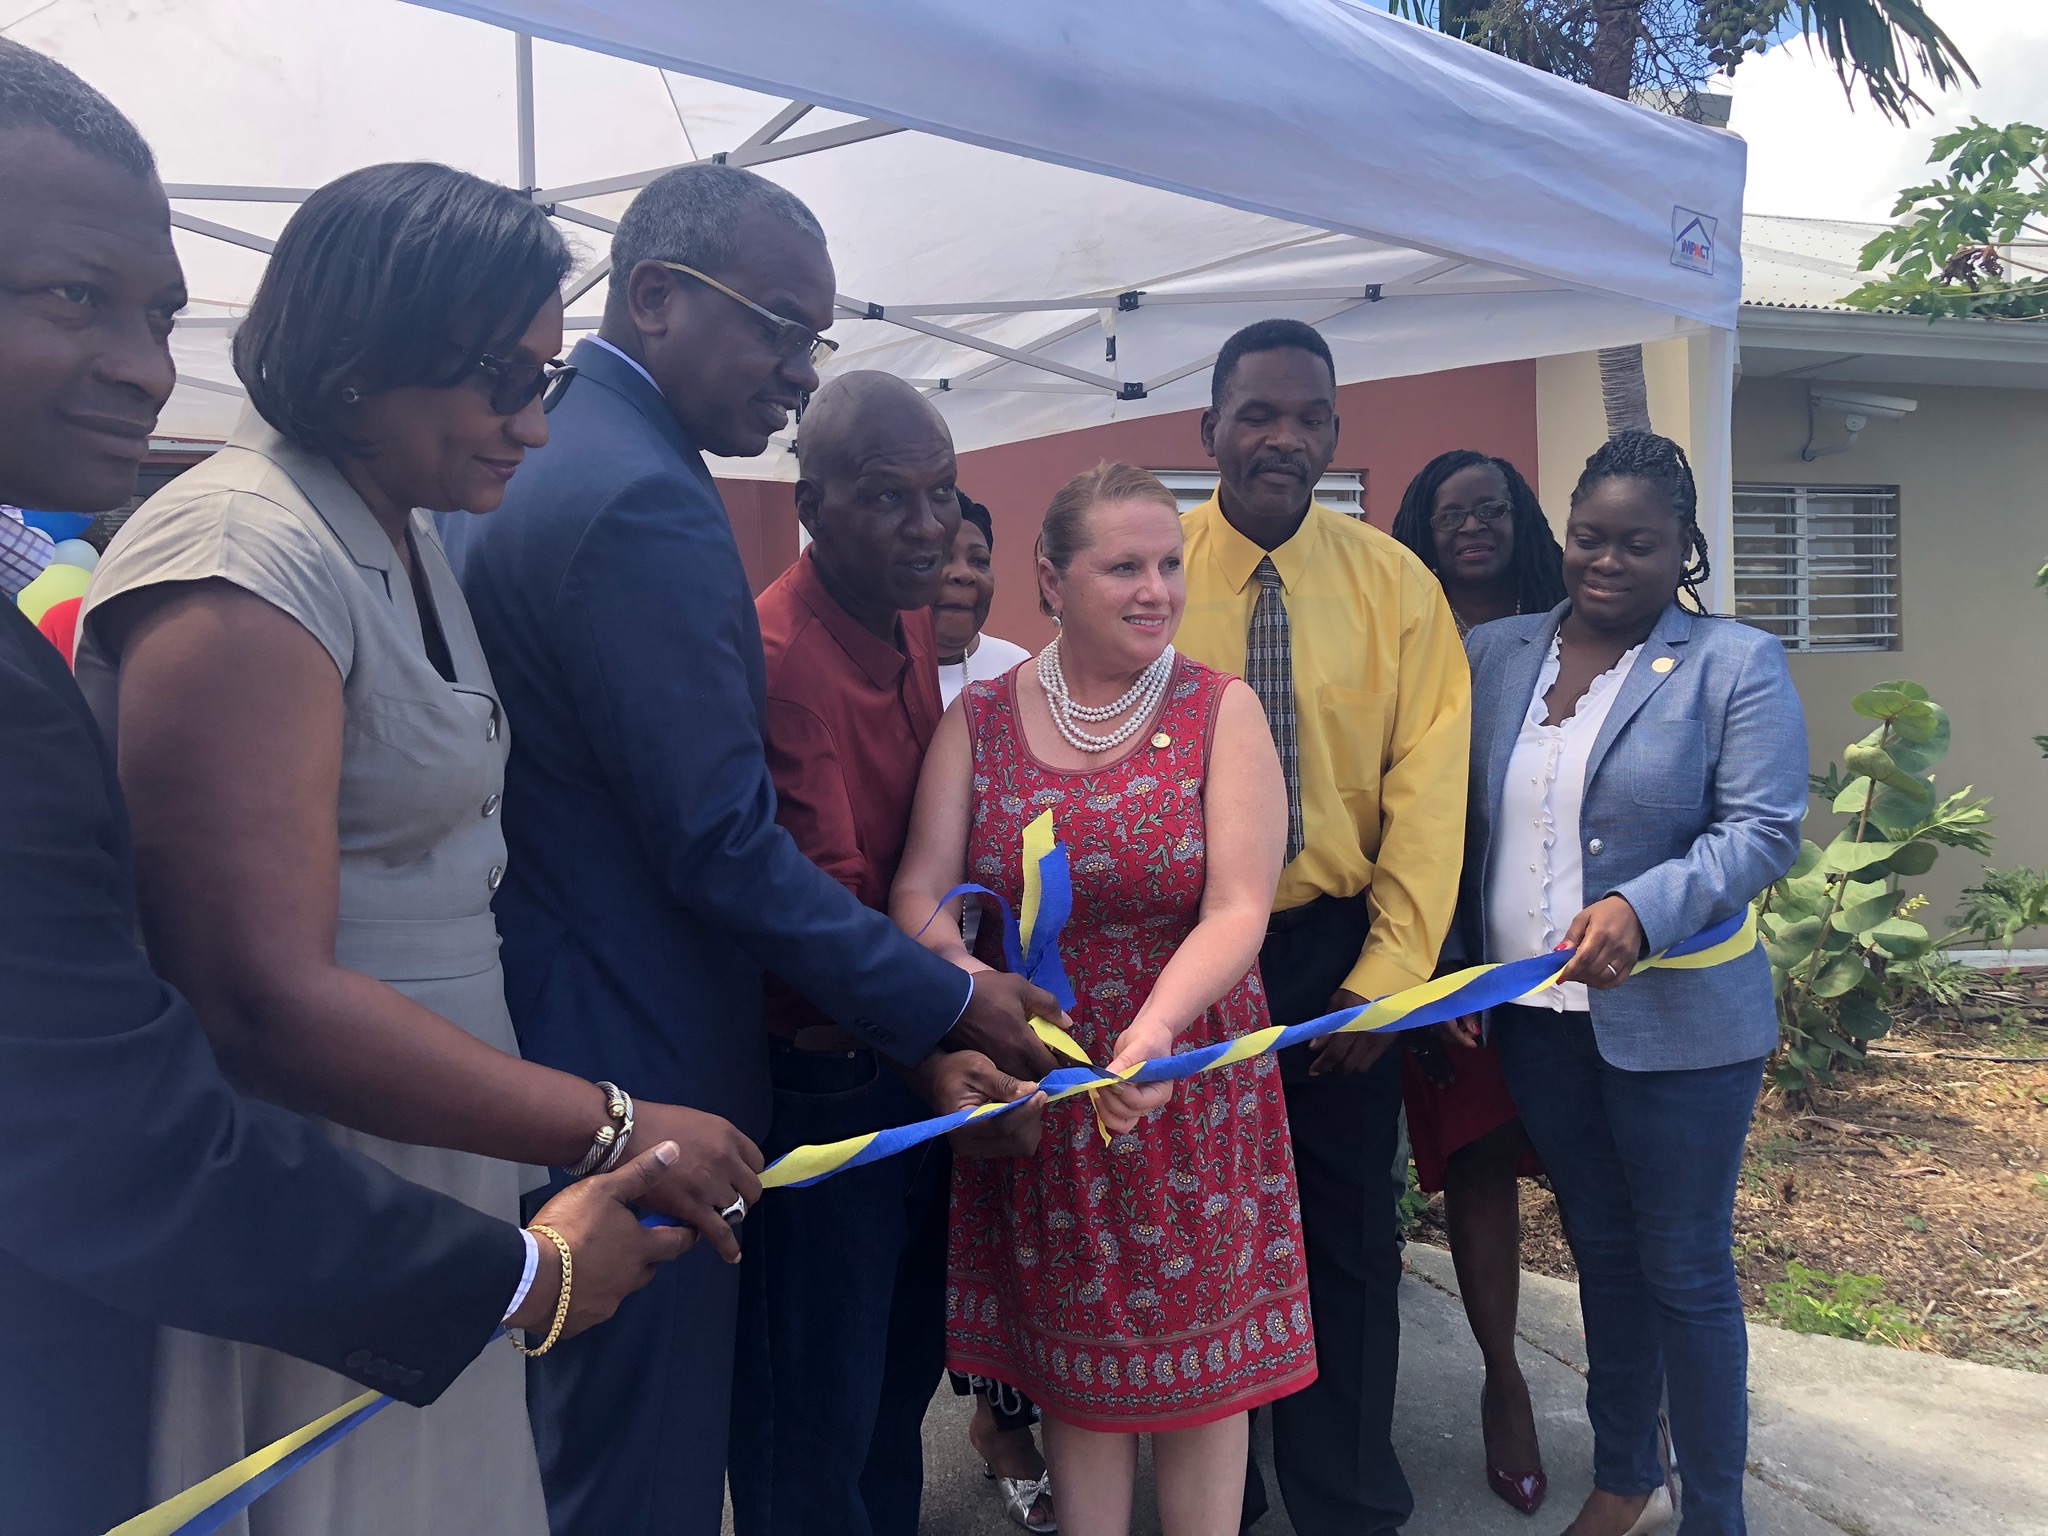 Eldra Schulterbrandt Residential Facility Re-Opens With Ribbon Cutting On St. Thomas